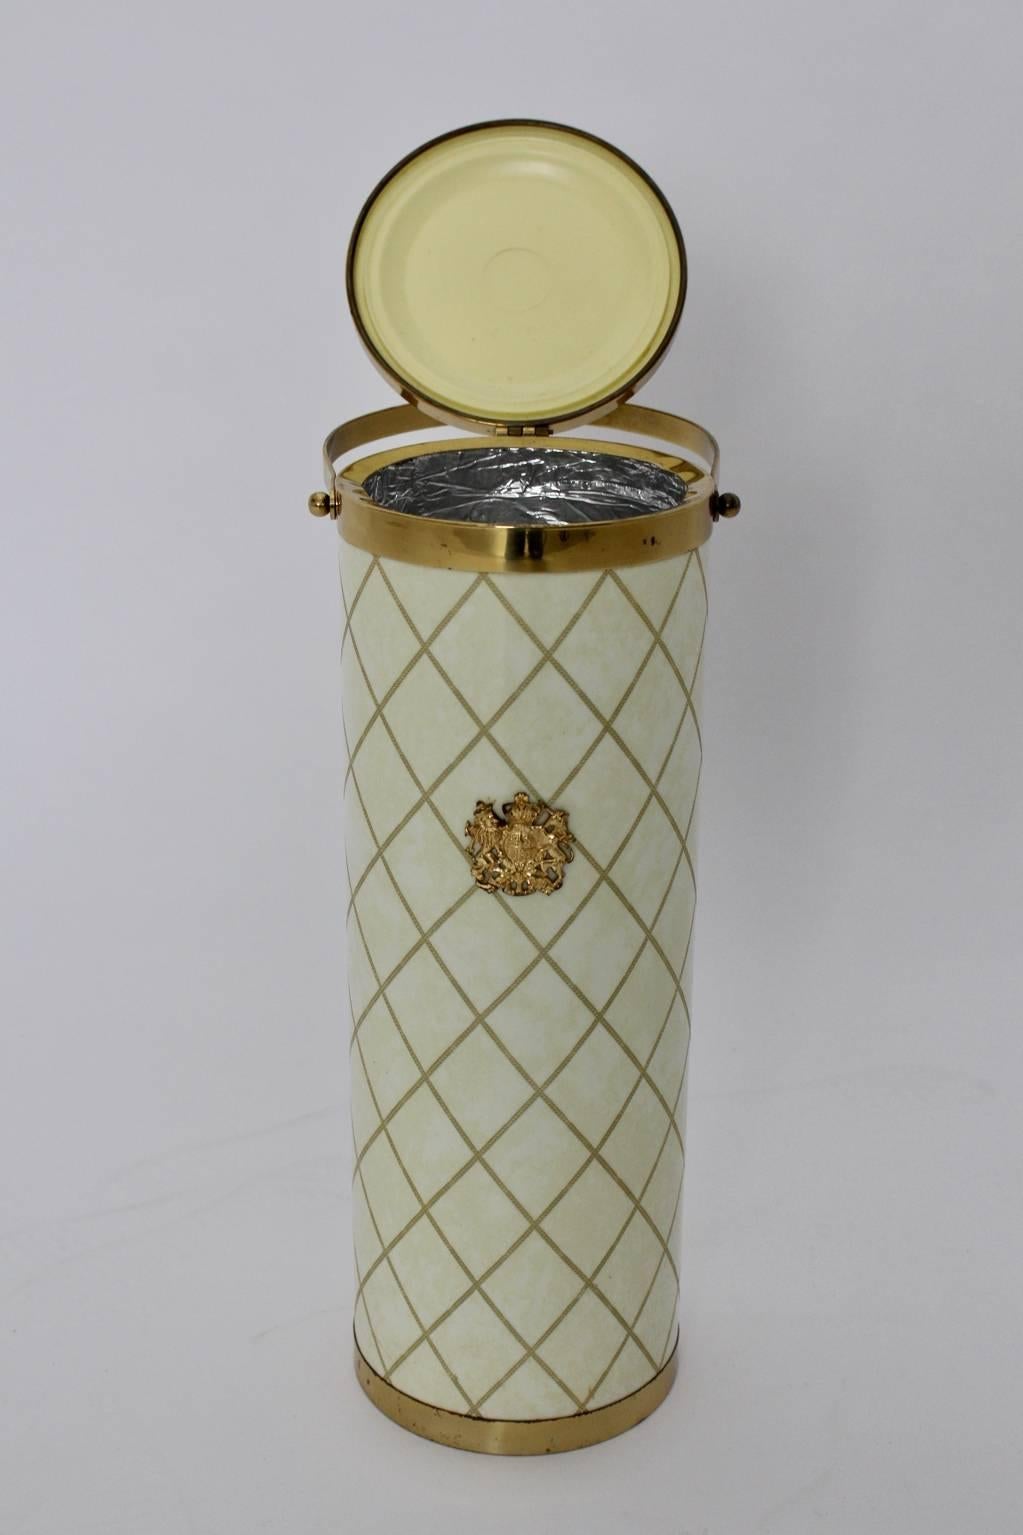 The wine cooler consists of a metal base covered with ivory plastic. The box has a pattern with rhombus and the front side is decorated with an emblem, which shows a golden crown and two lions.
Internal is a silver foil covering for cooling your